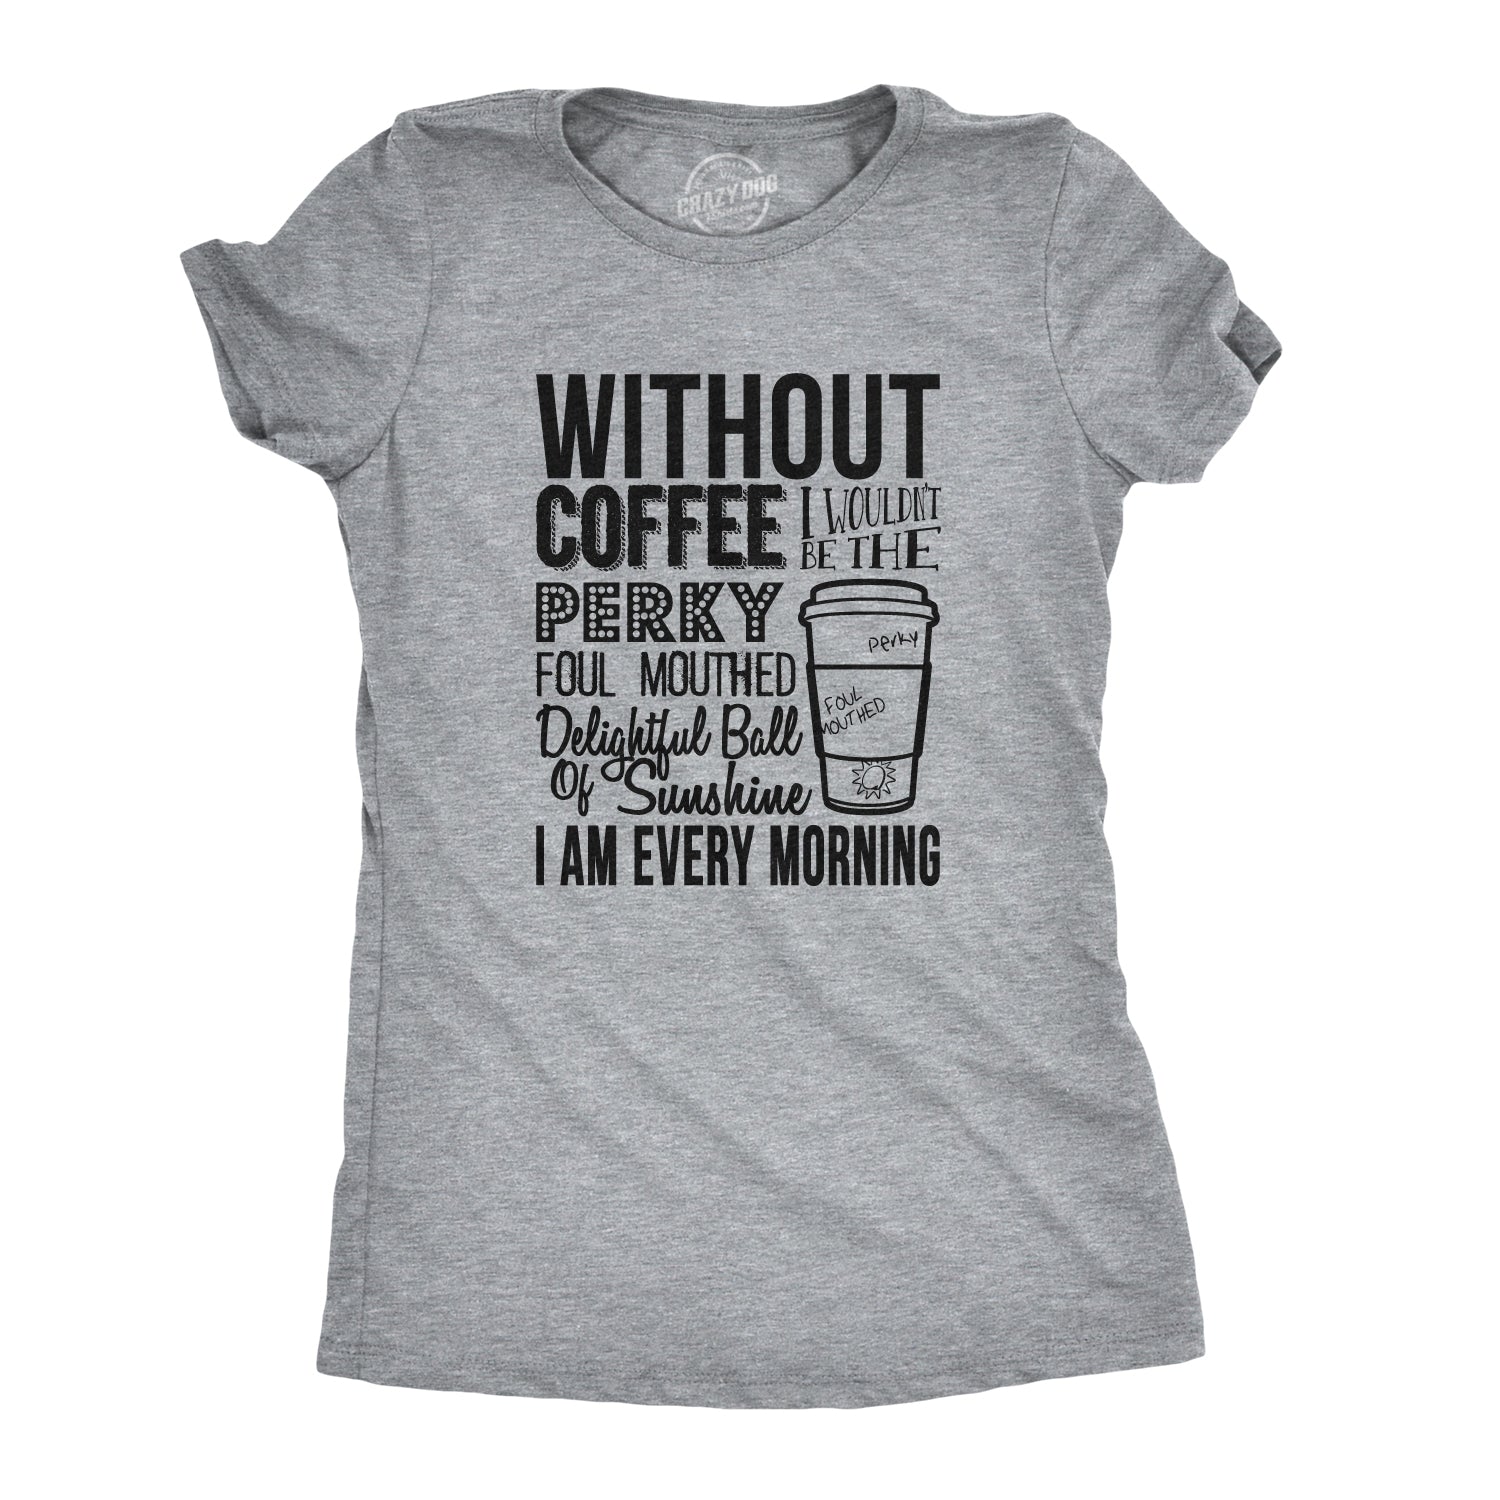 Funny Light Heather Grey Without Coffee I Wouldn’t Be Womens T Shirt Nerdy Coffee Food Retro Tee